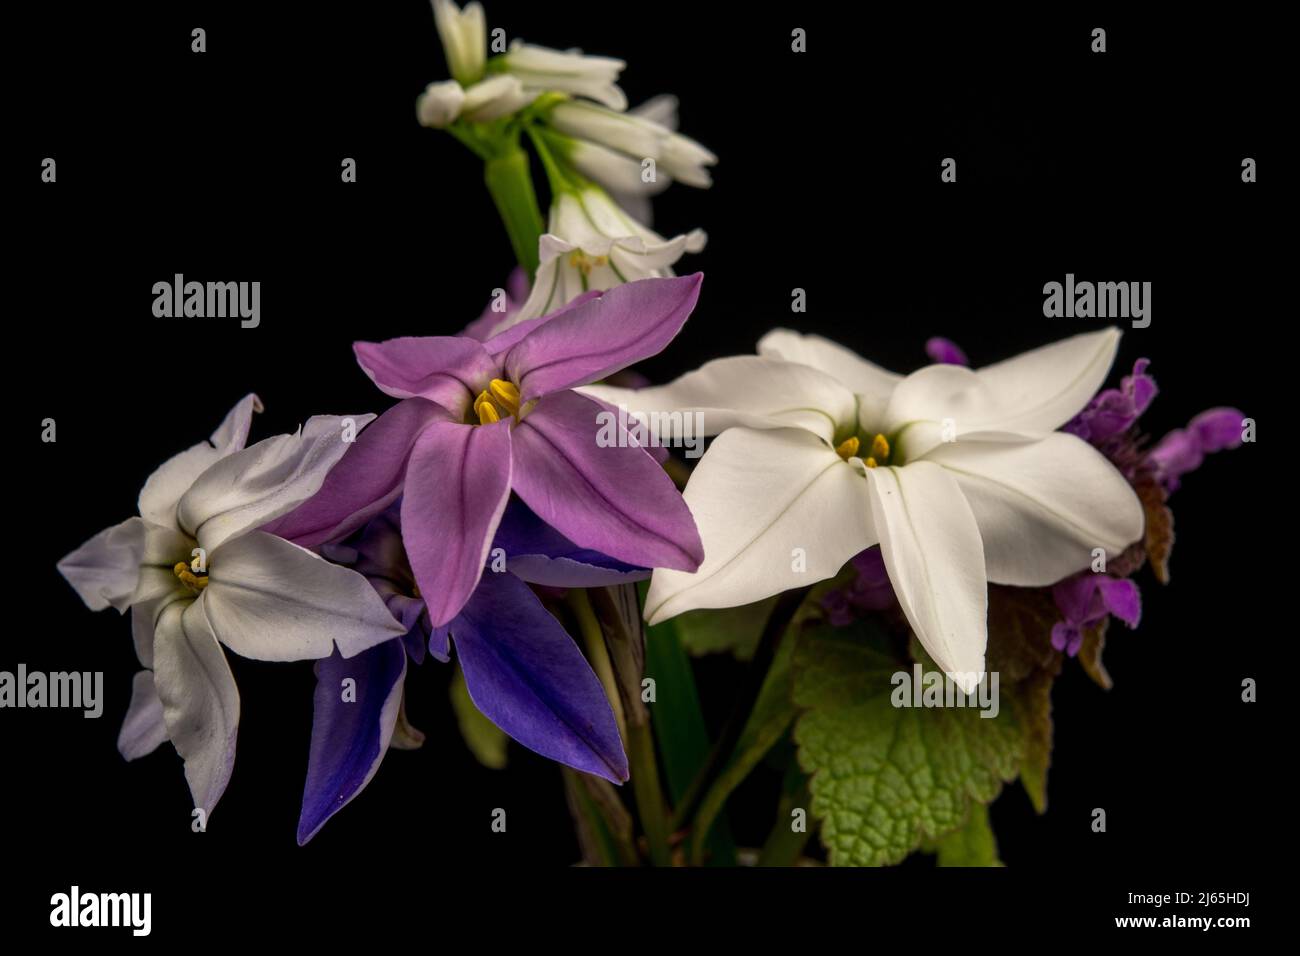 Close up of flowers of Triteleia uniflora selections Stock Photo